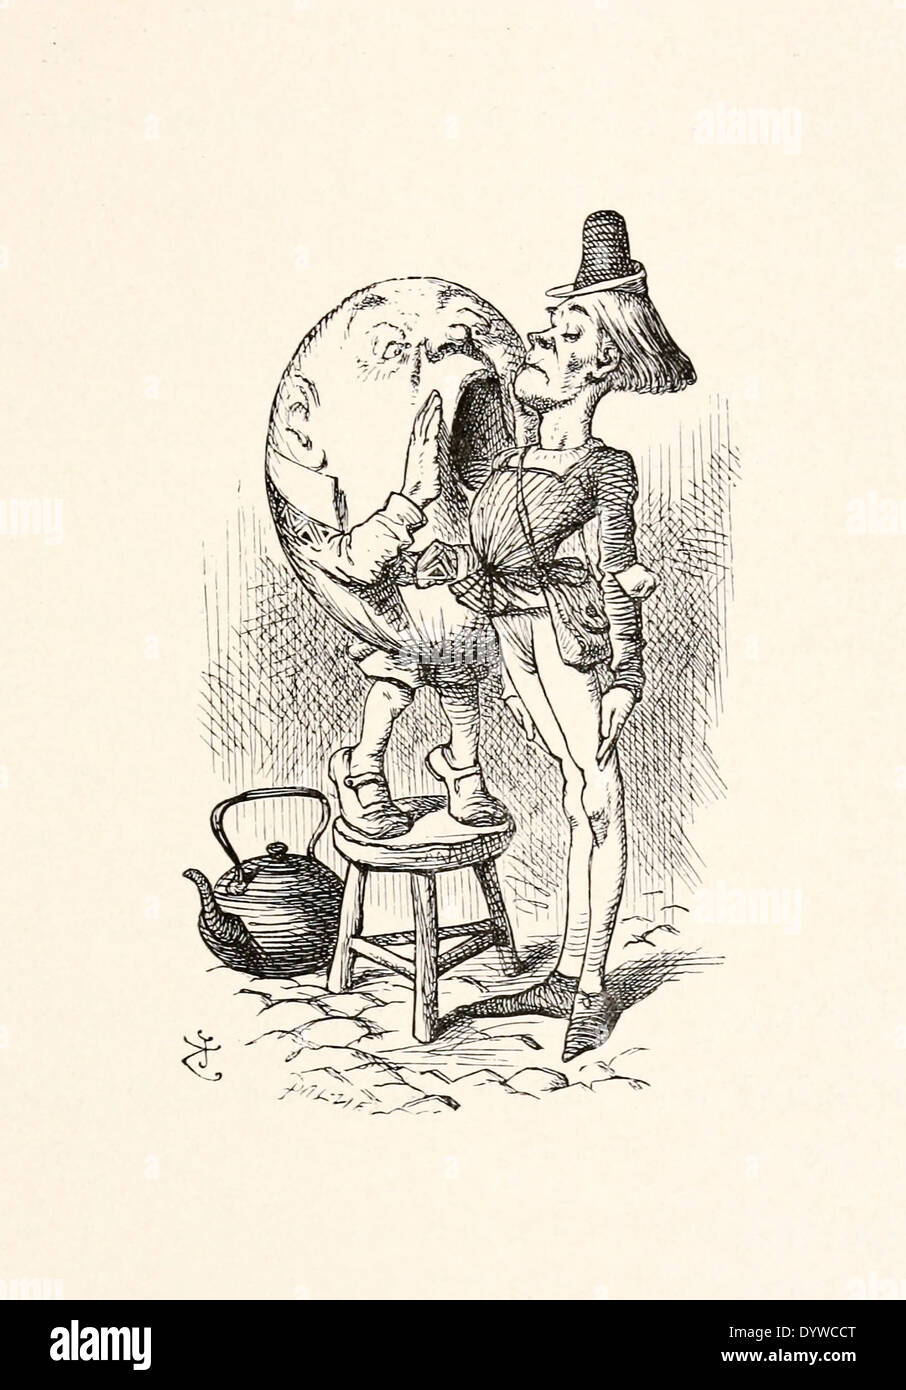 John Tenniel (1820-1914) illustration from Lewis Carroll's 'Through the Looking-Glass’ published in 1871.Humpty shouts Stock Photo